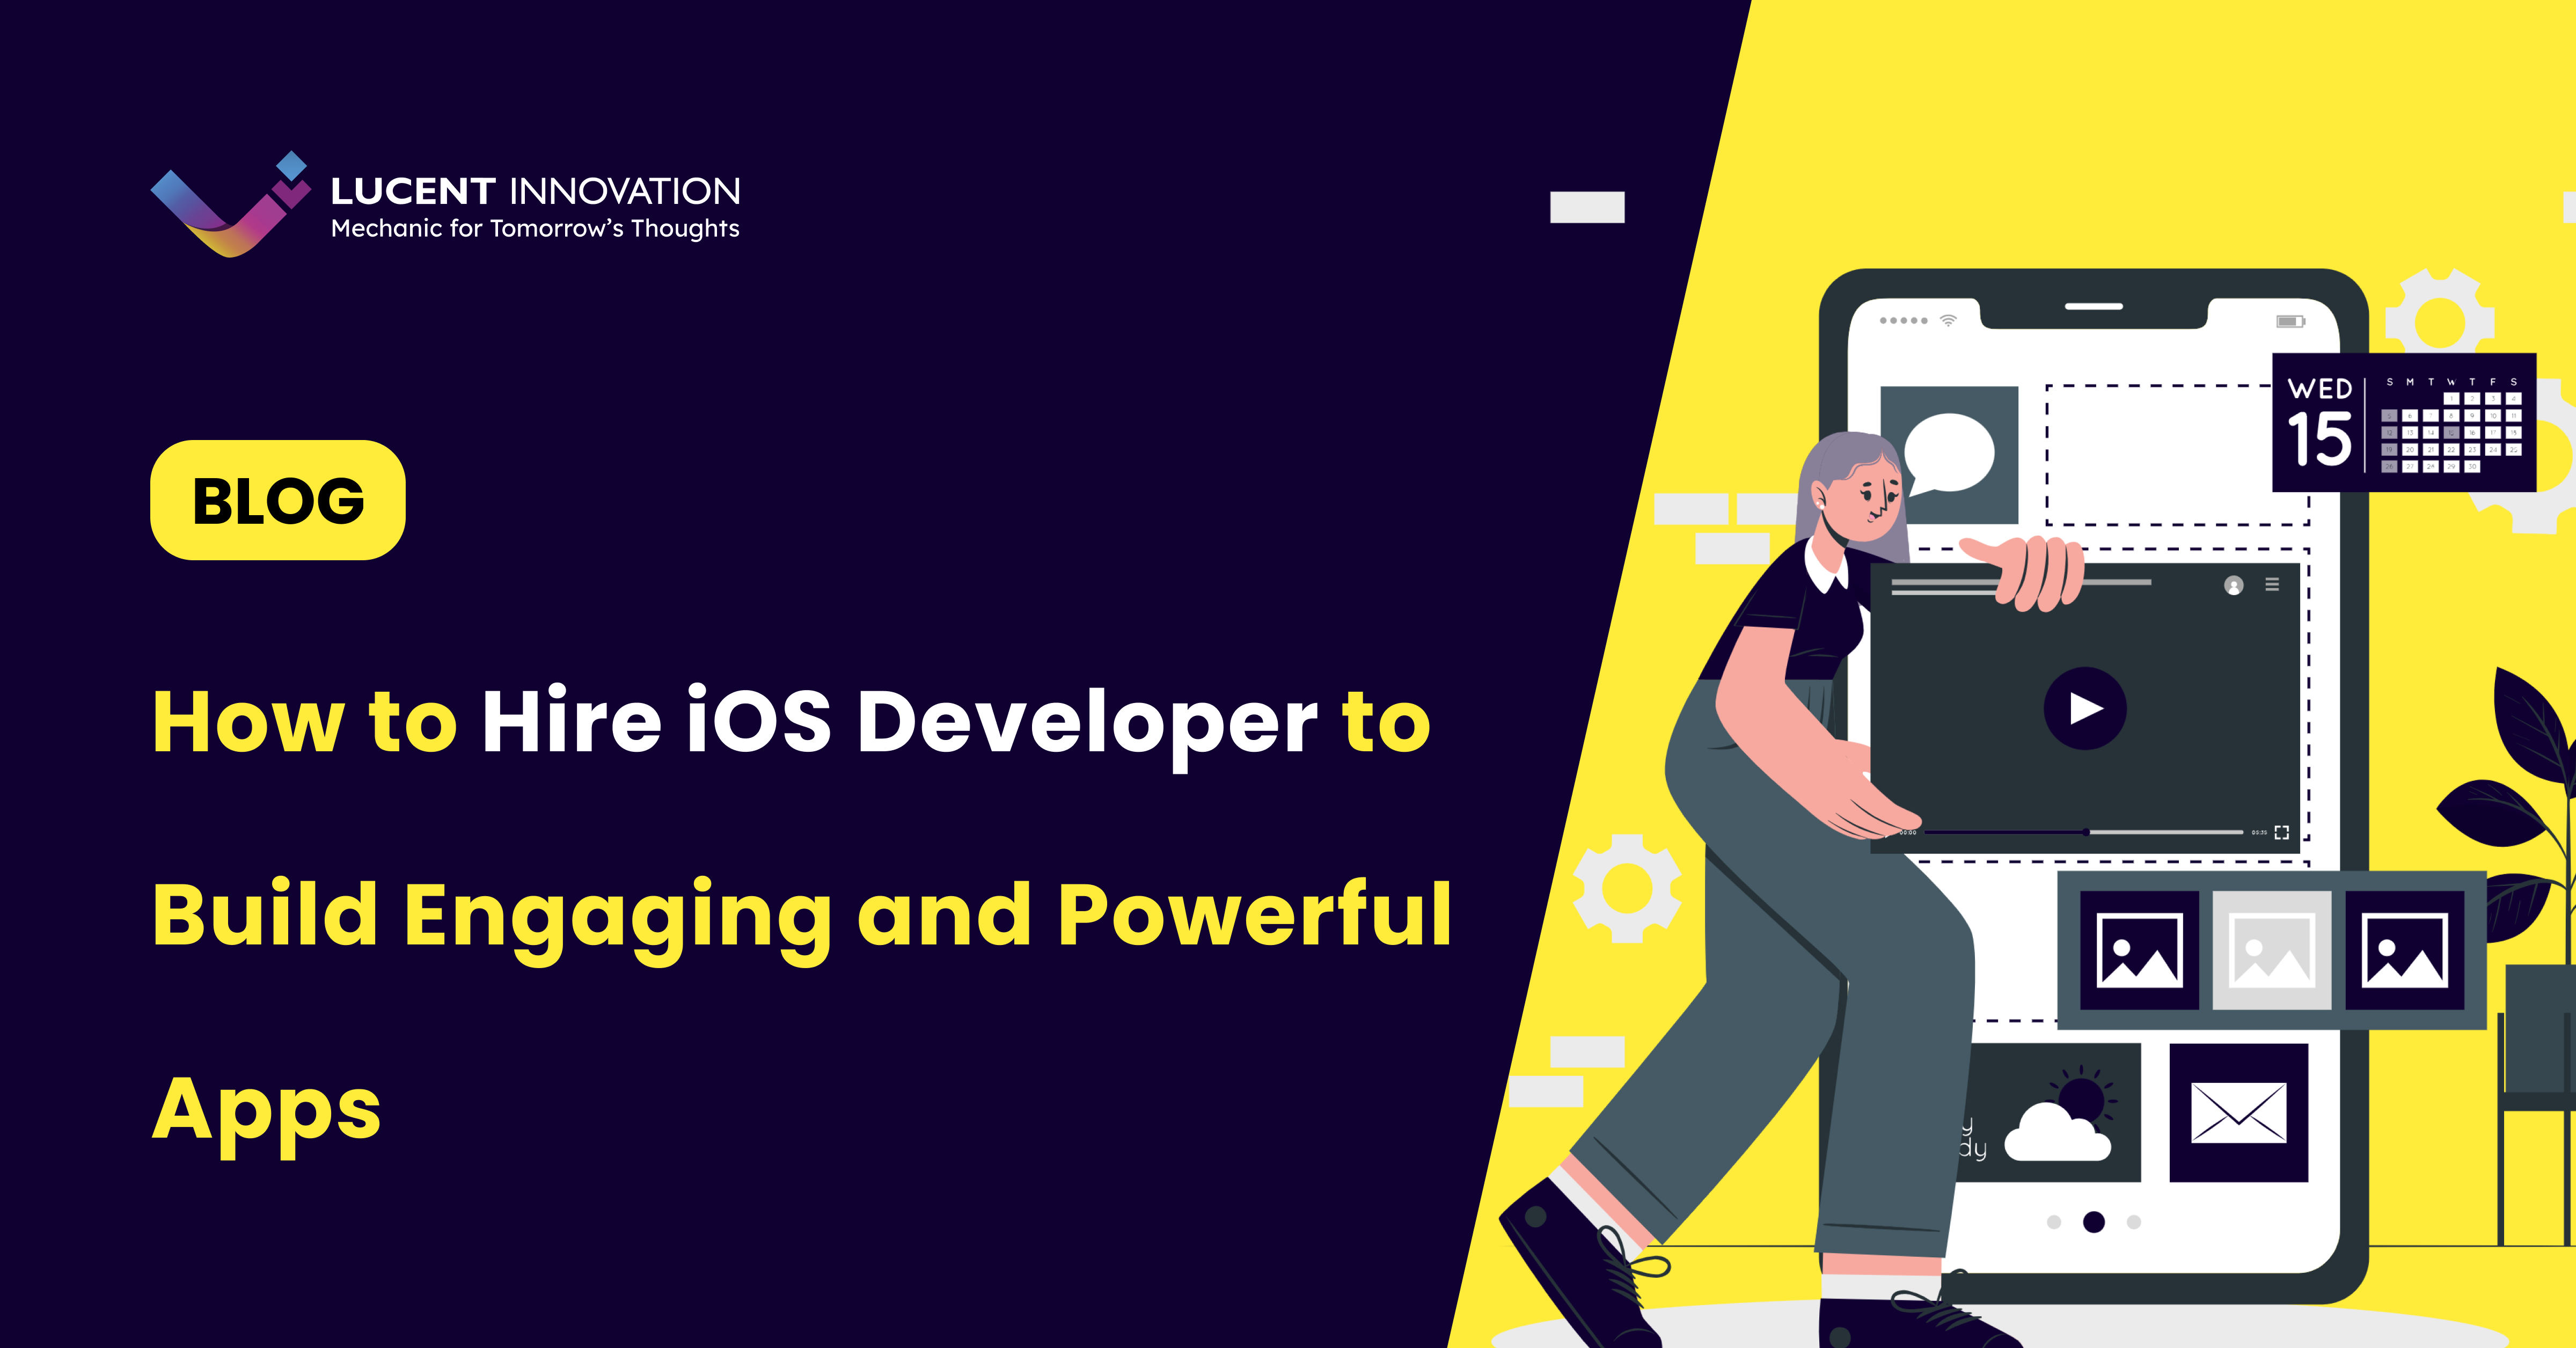 How to Hire iOS Developers to Build Engaging and Powerful Apps